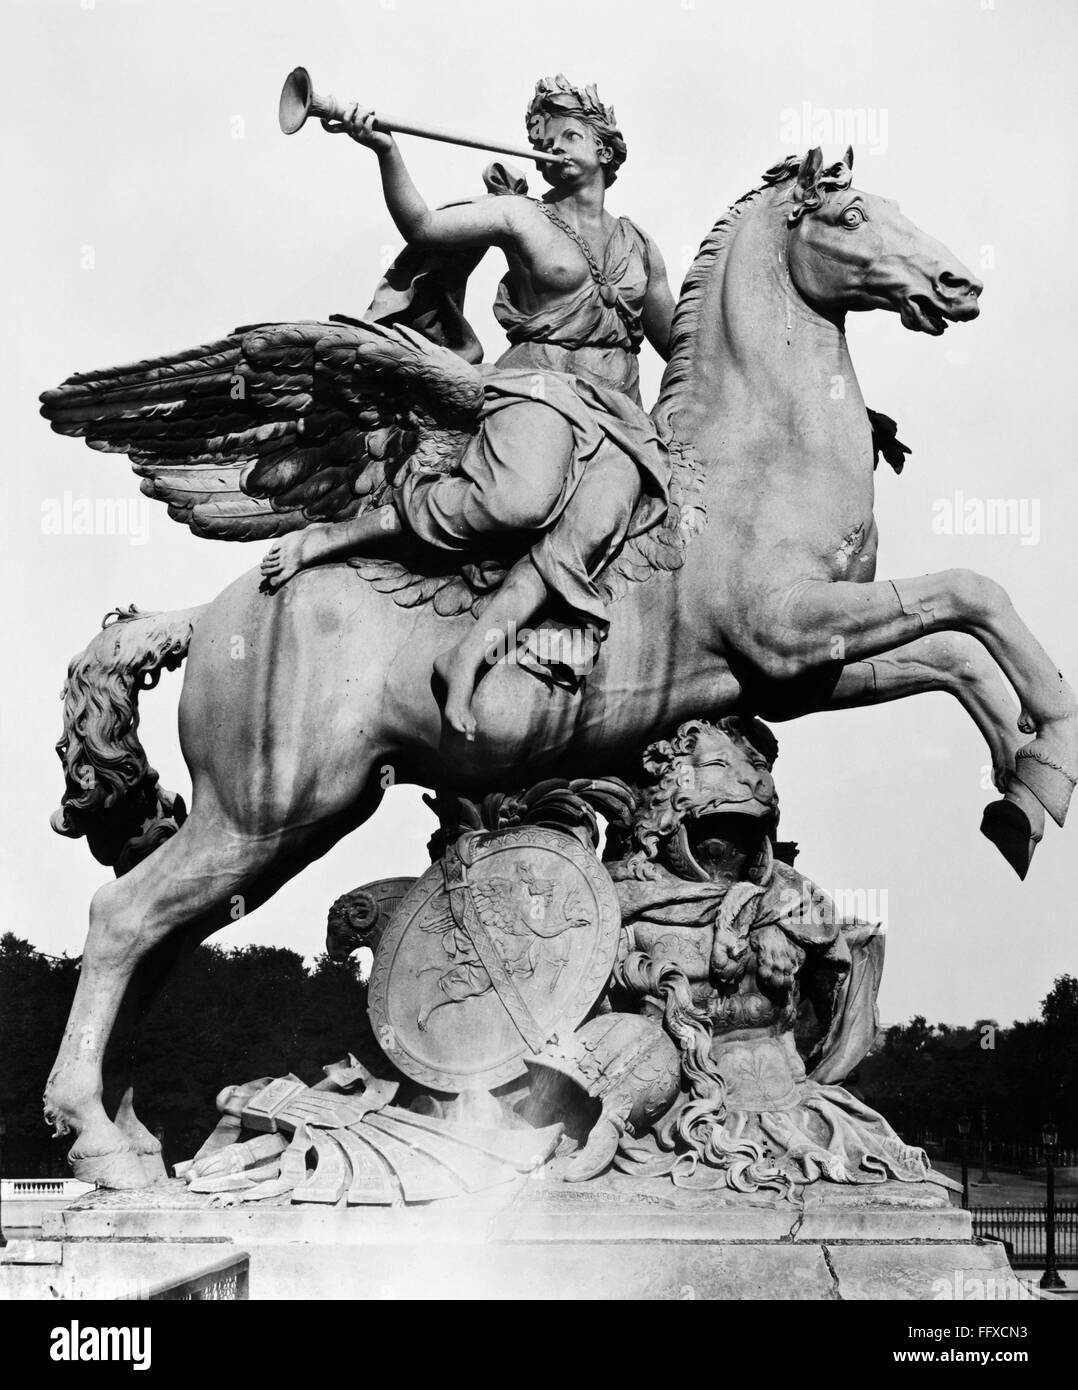 COYSEVOX: FAME AND PEGASUS. /nFame Riding Pegasus. Sculpture in the Tuilerie Gardens in Paris, by Charles-Antoine Coysevox, 1699-1702. Stock Photo